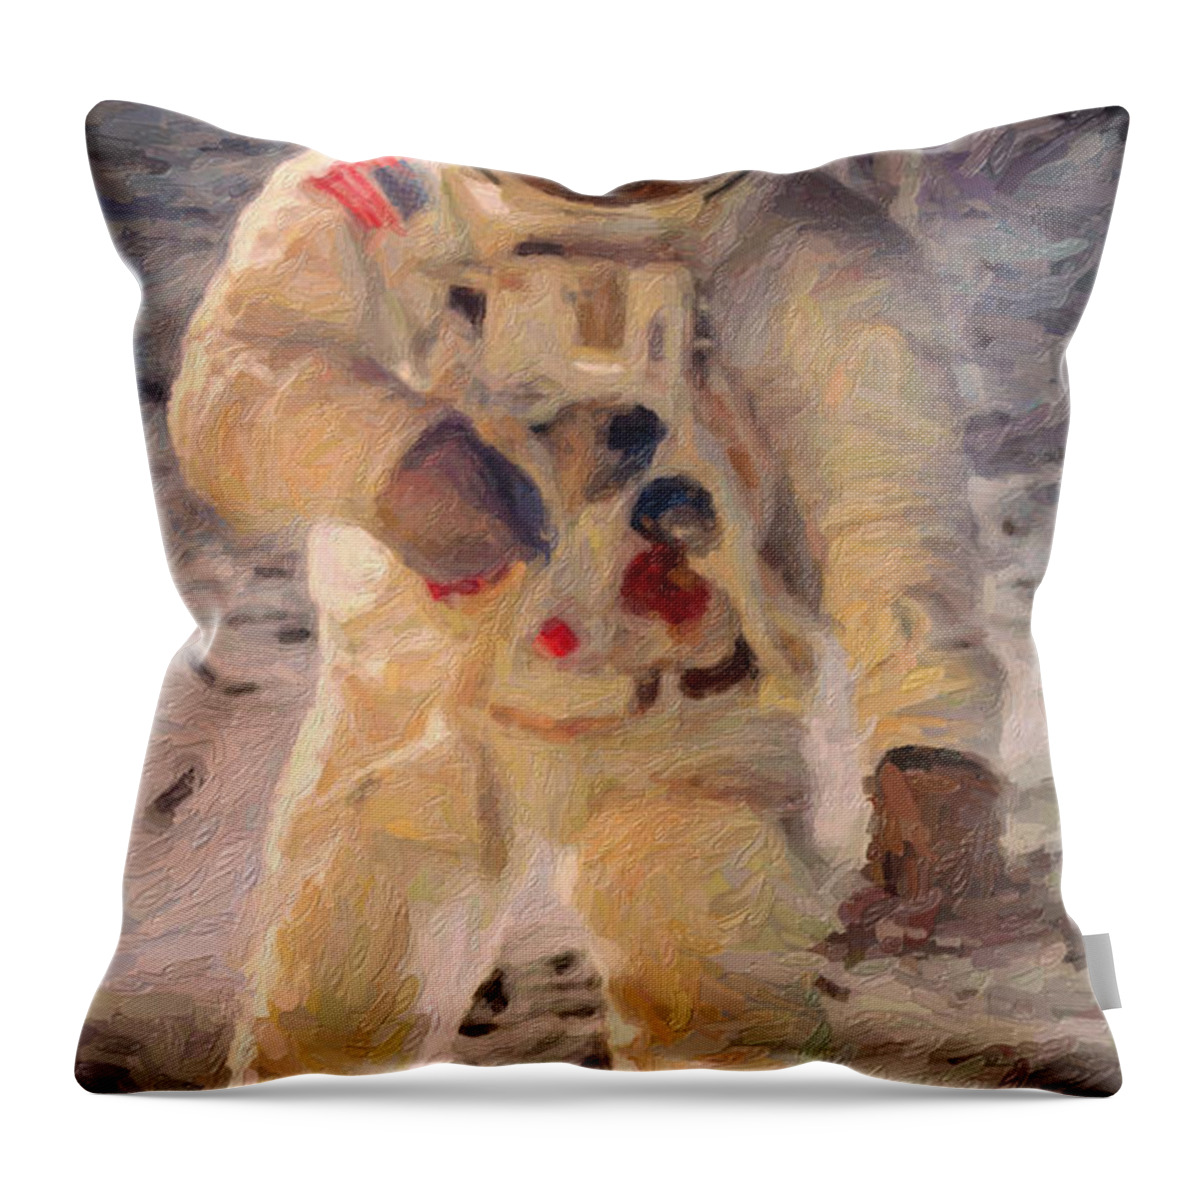 Horsehead Nebula Throw Pillow featuring the painting Apollo 11 Astronaut Painting by Celestial Images